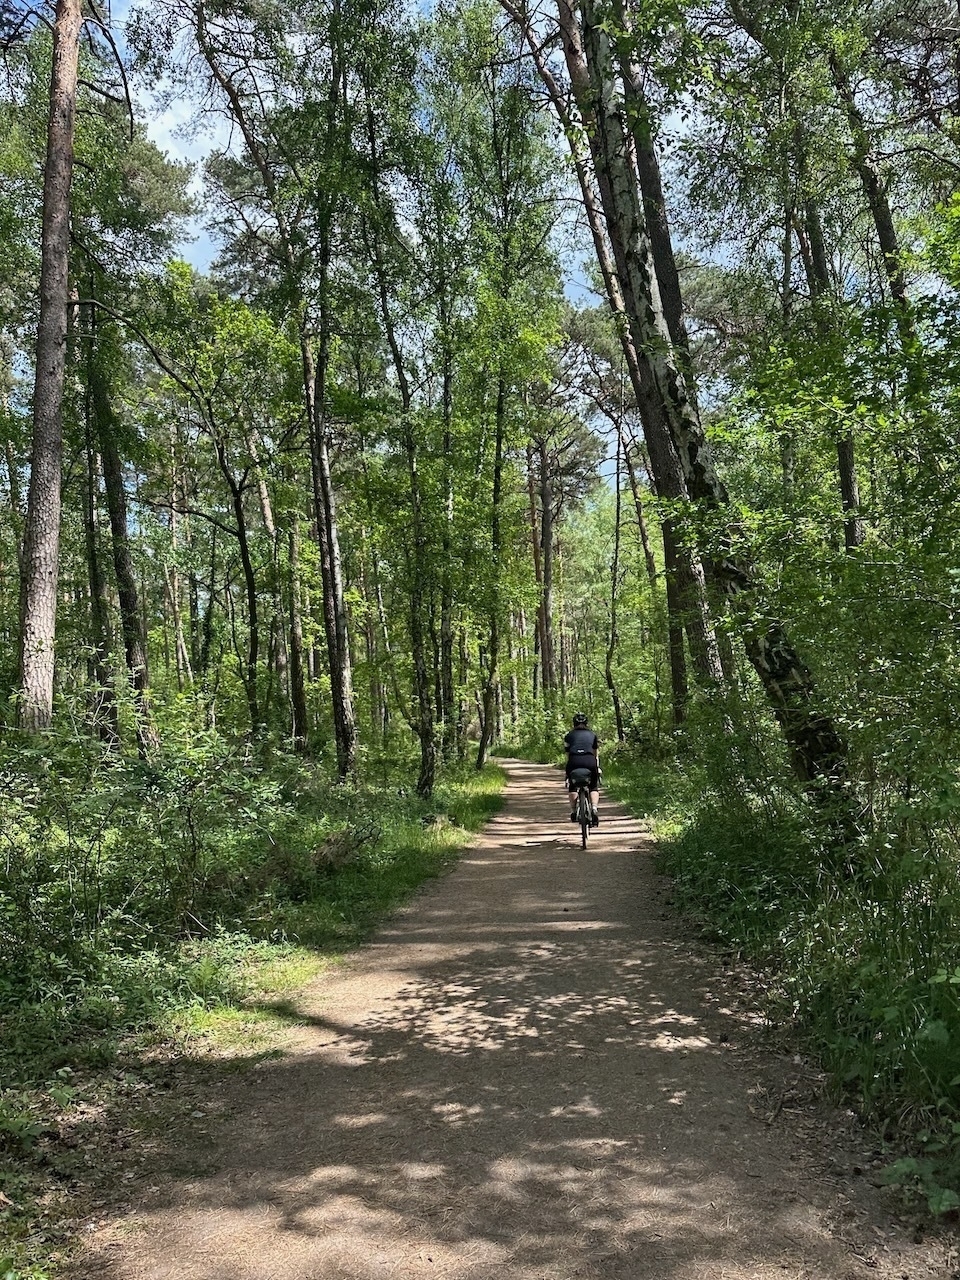 Cyclist on gravel bike on forest path surrounded by green trees